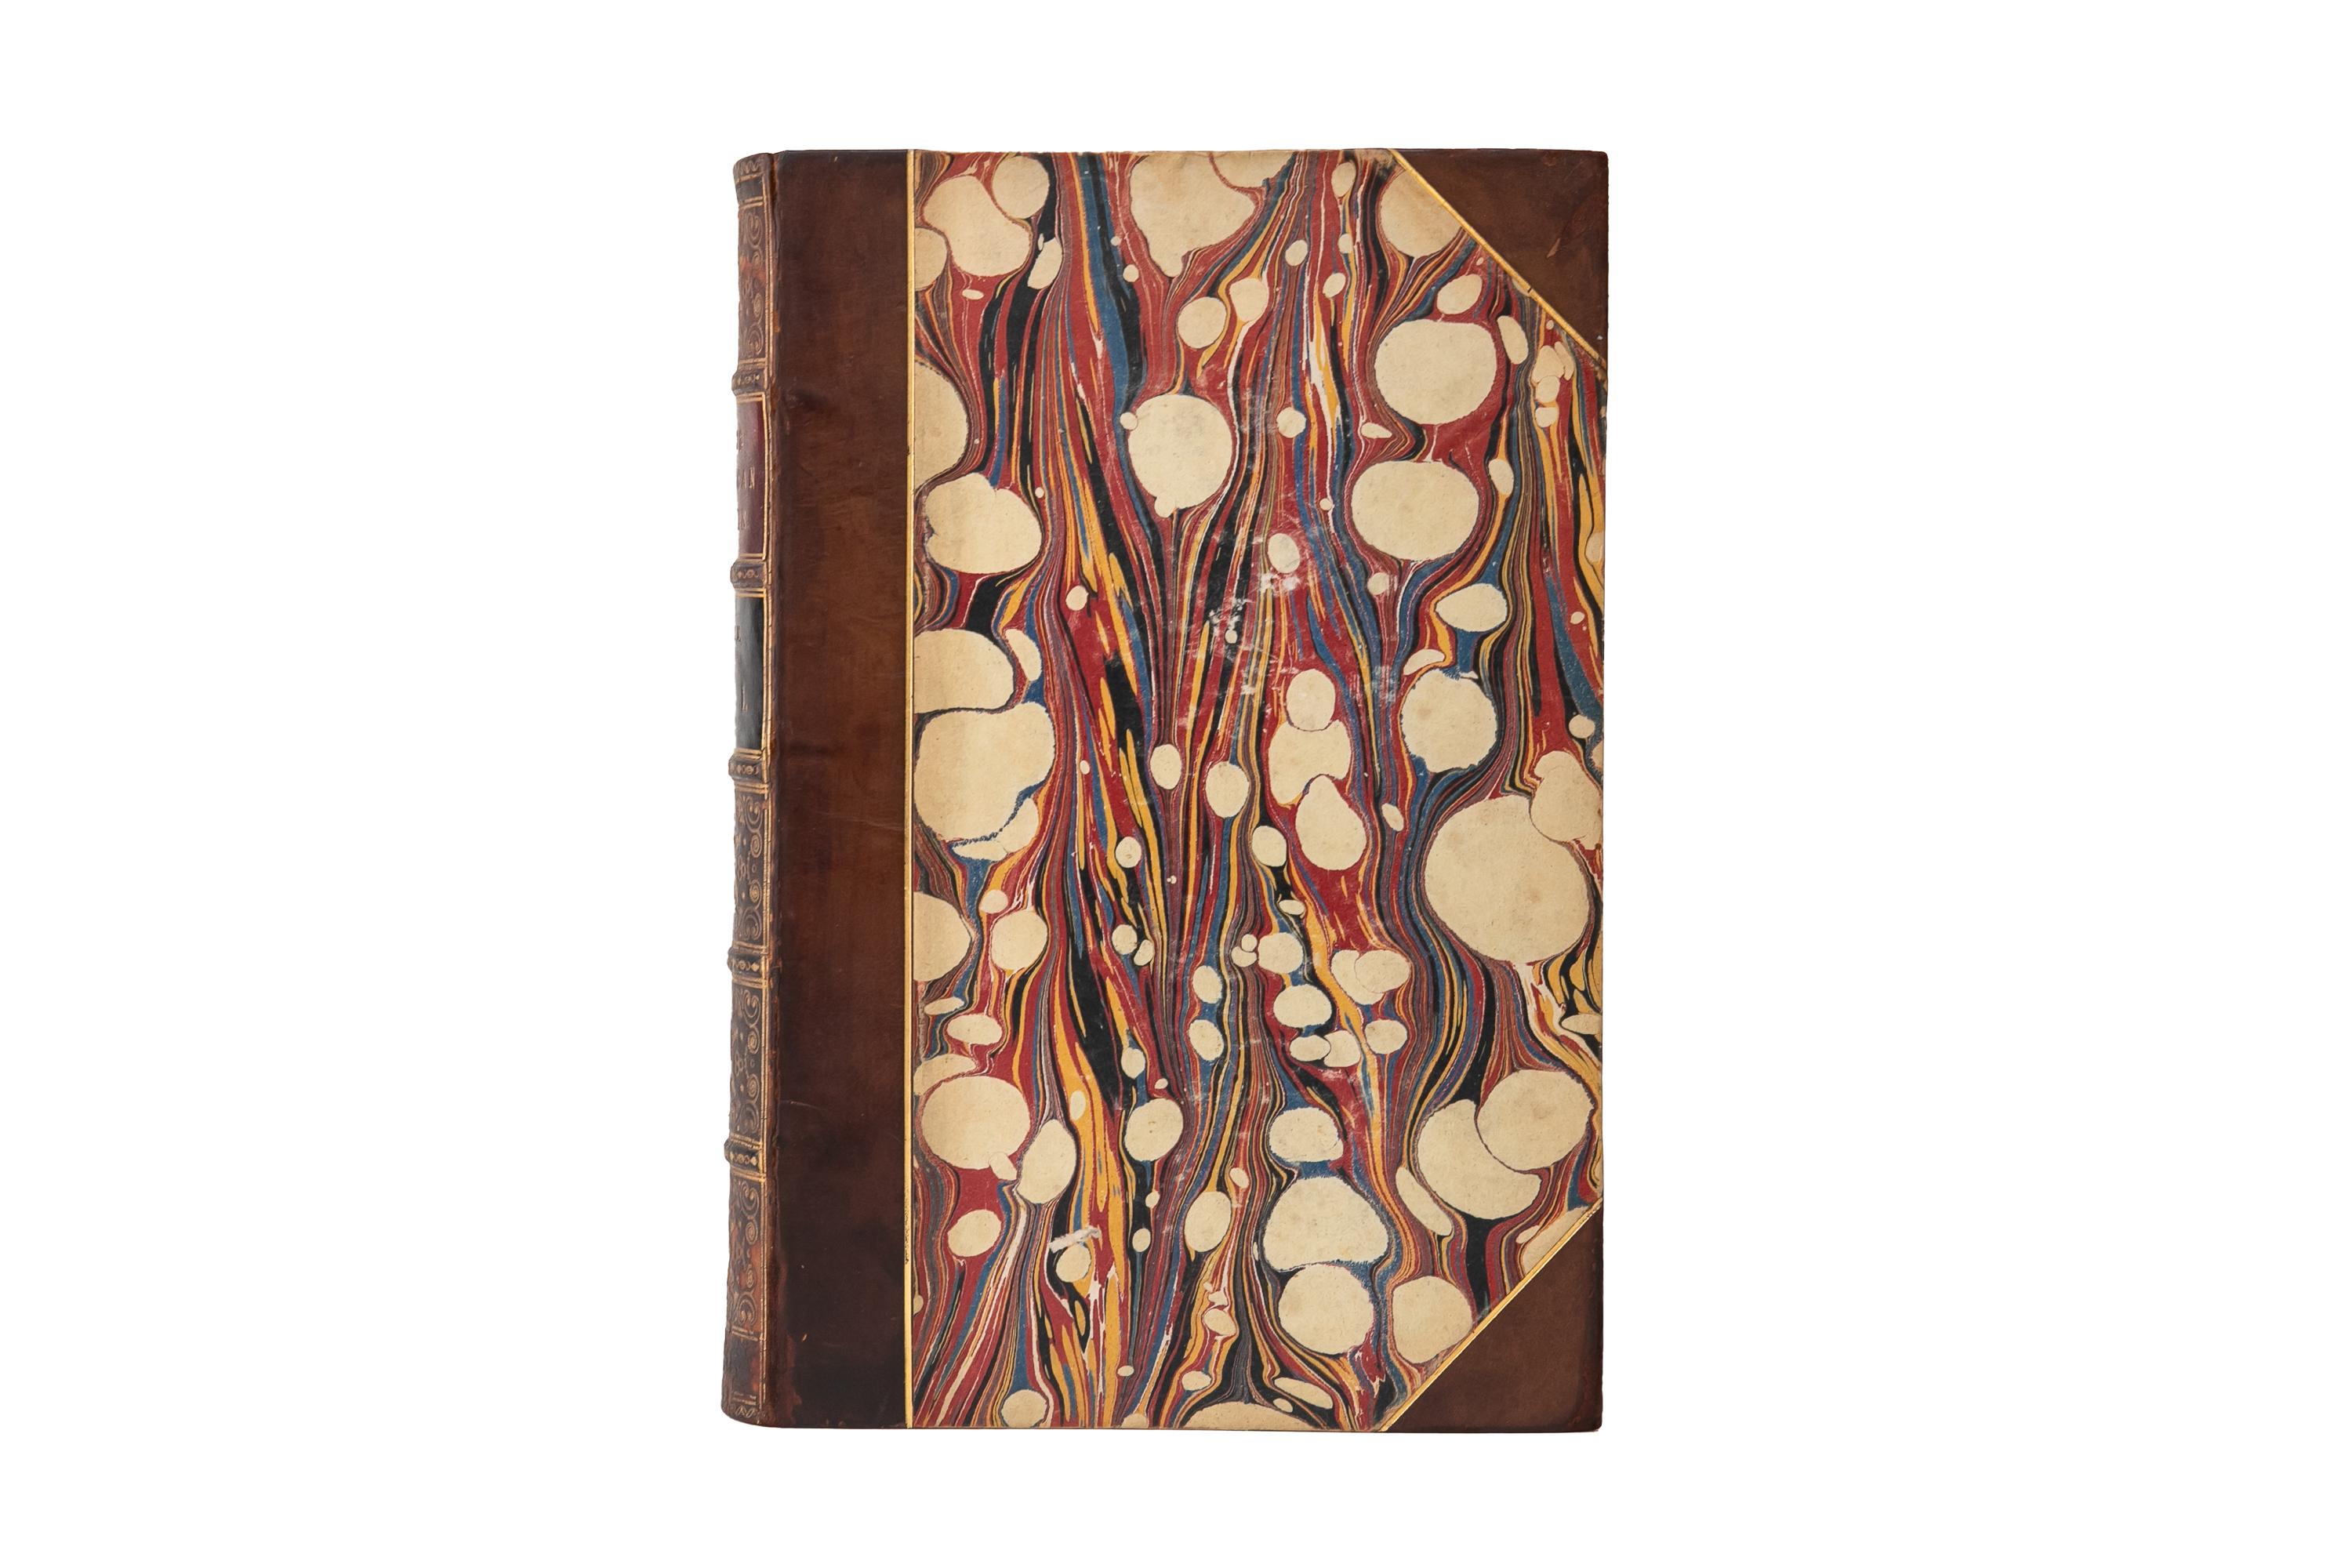 1 Volumes. George Catlin, North American Indians. Bound in 3/4 brown calf and marbled boards. The covers and raised band spine are gilt-tooled with red and black morocco labels. All edges are marbled with marbled endpapers. 360 engravings from the